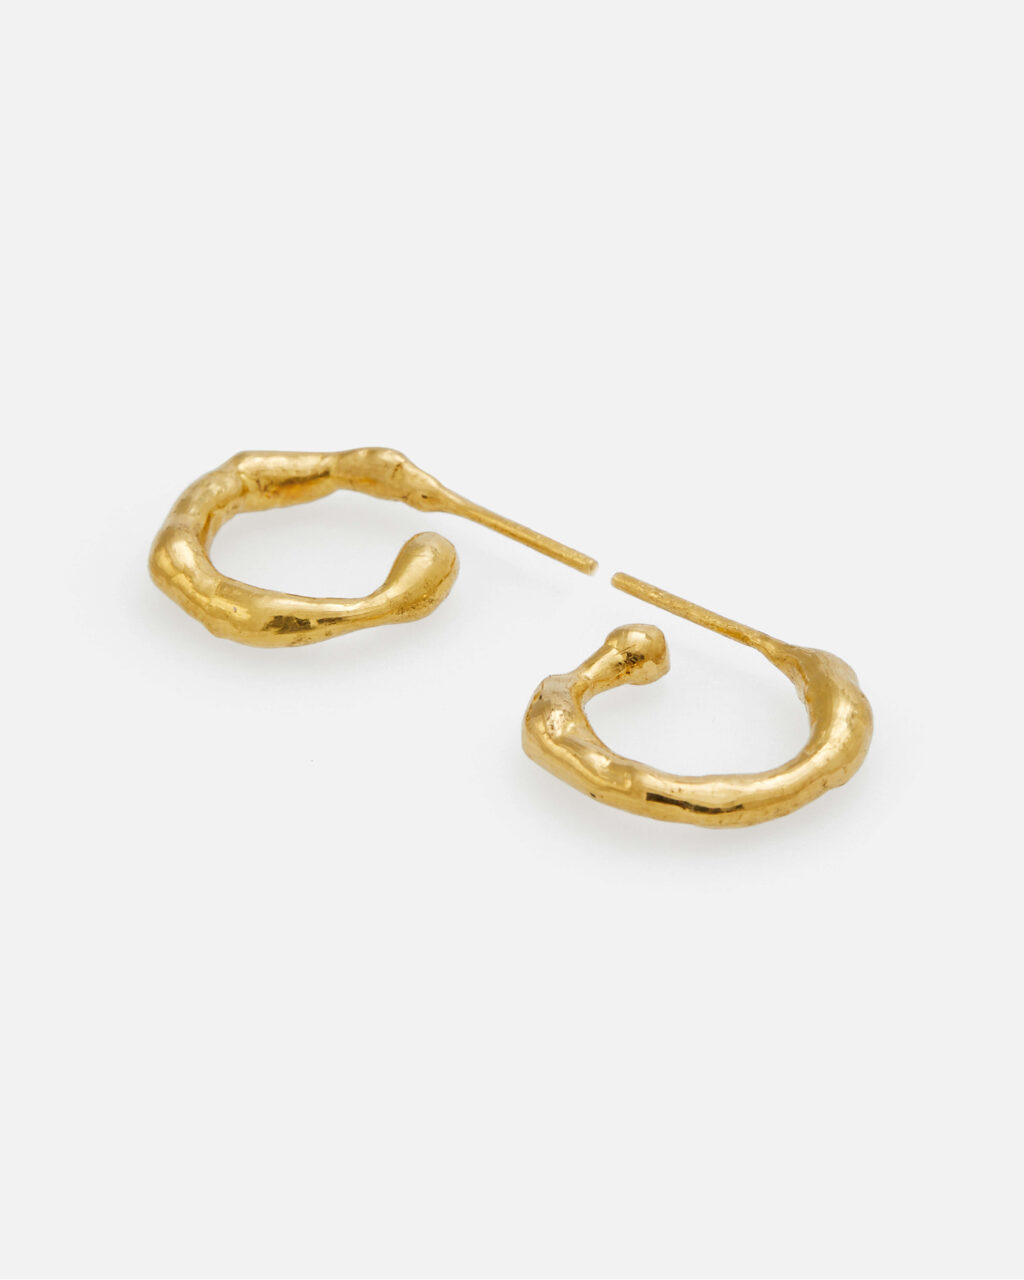 melted fine gold hoops 17mm